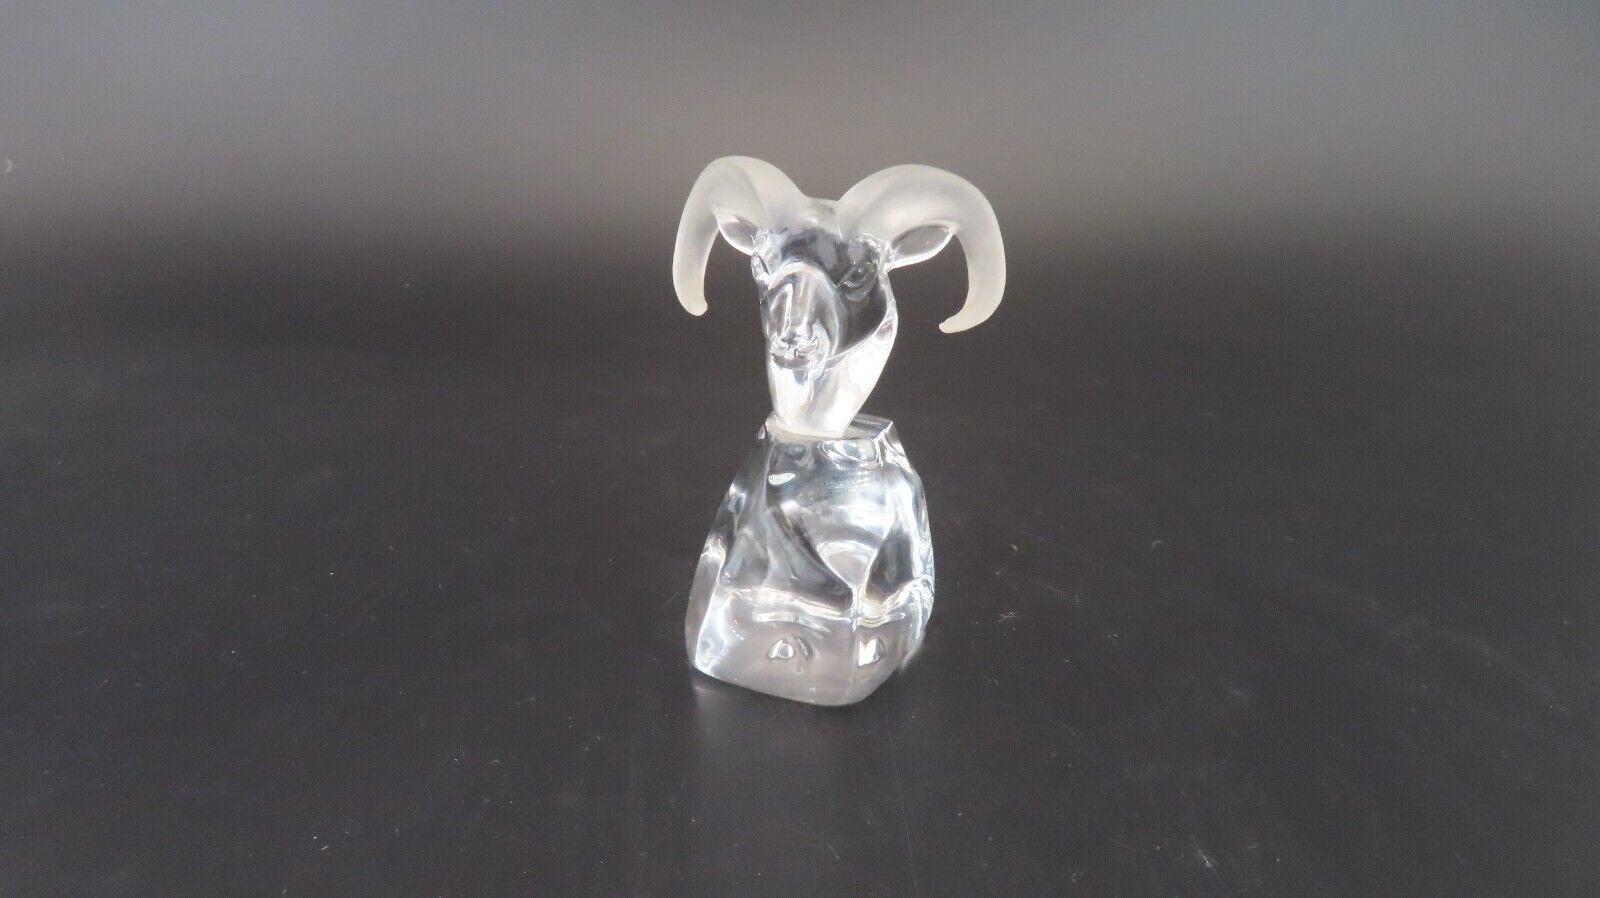 Swarovski Crystal Rams Head Figurine Paper Weight Frosted Ebeling & Reuss 3.5"H